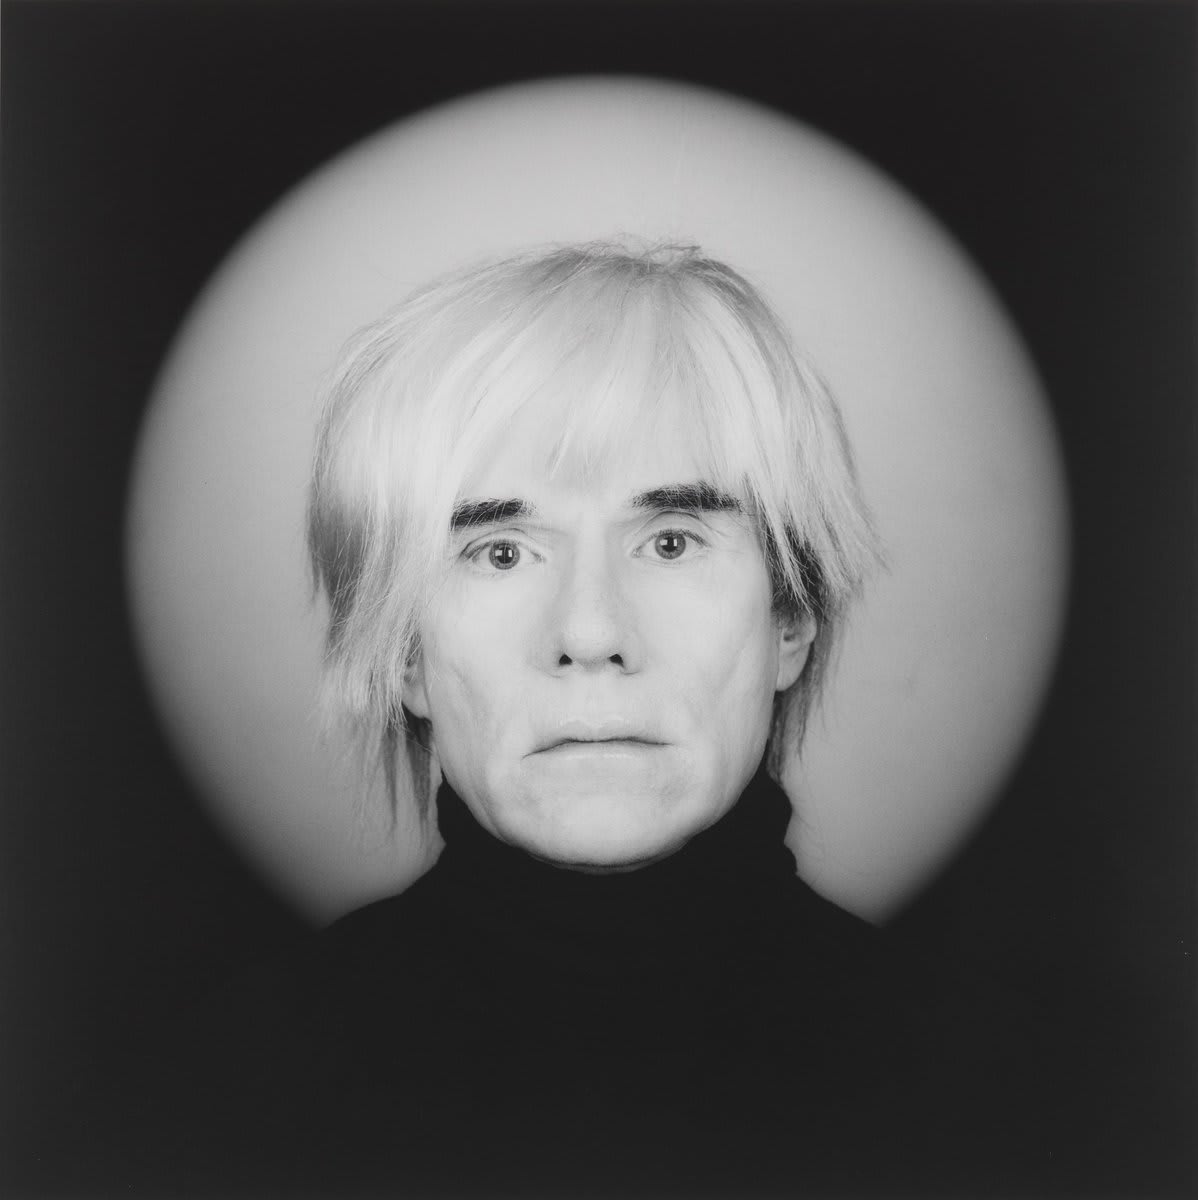 MapplethopeMondays—Robert Mapplethorpe's portrait of Andy Warhol, imagined as a religious icon with a halo of light around his head, marked a long-standing relationship between the two artists.